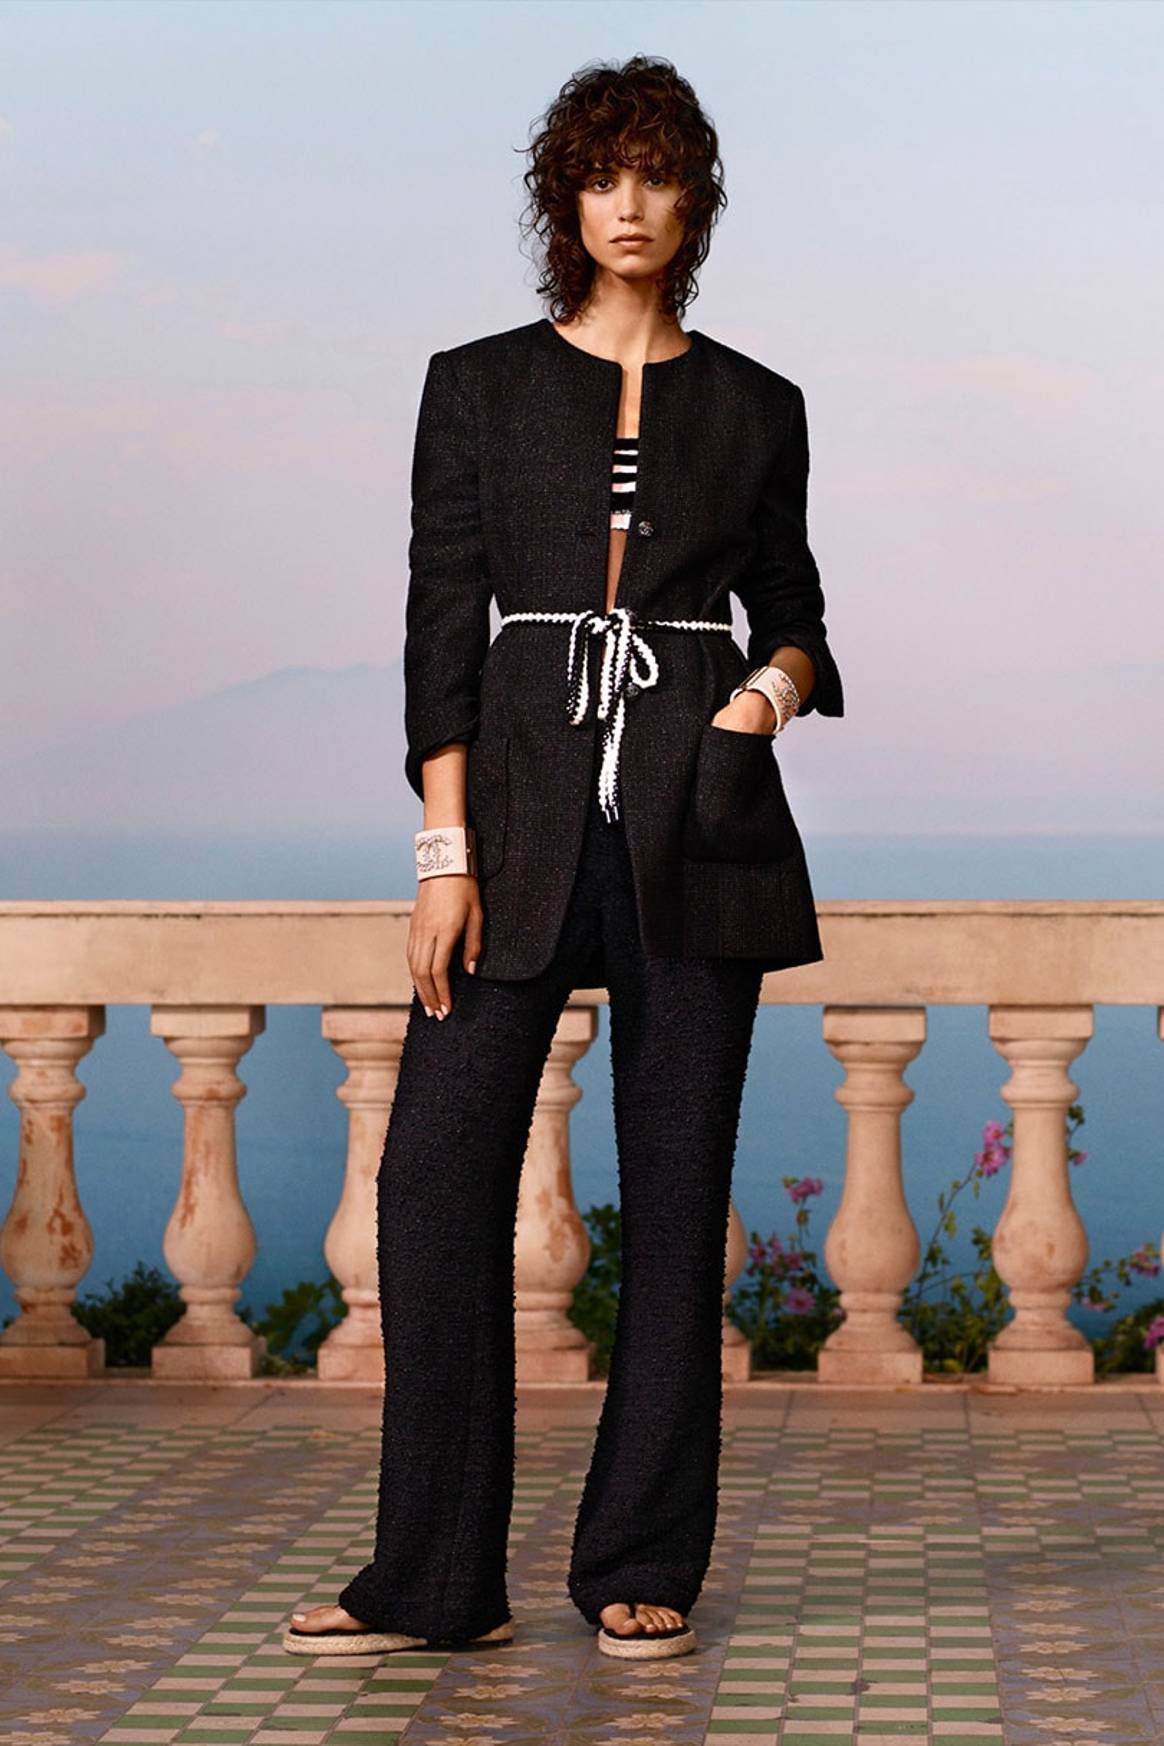 Chanel presents Cruise 2020/21 collection online